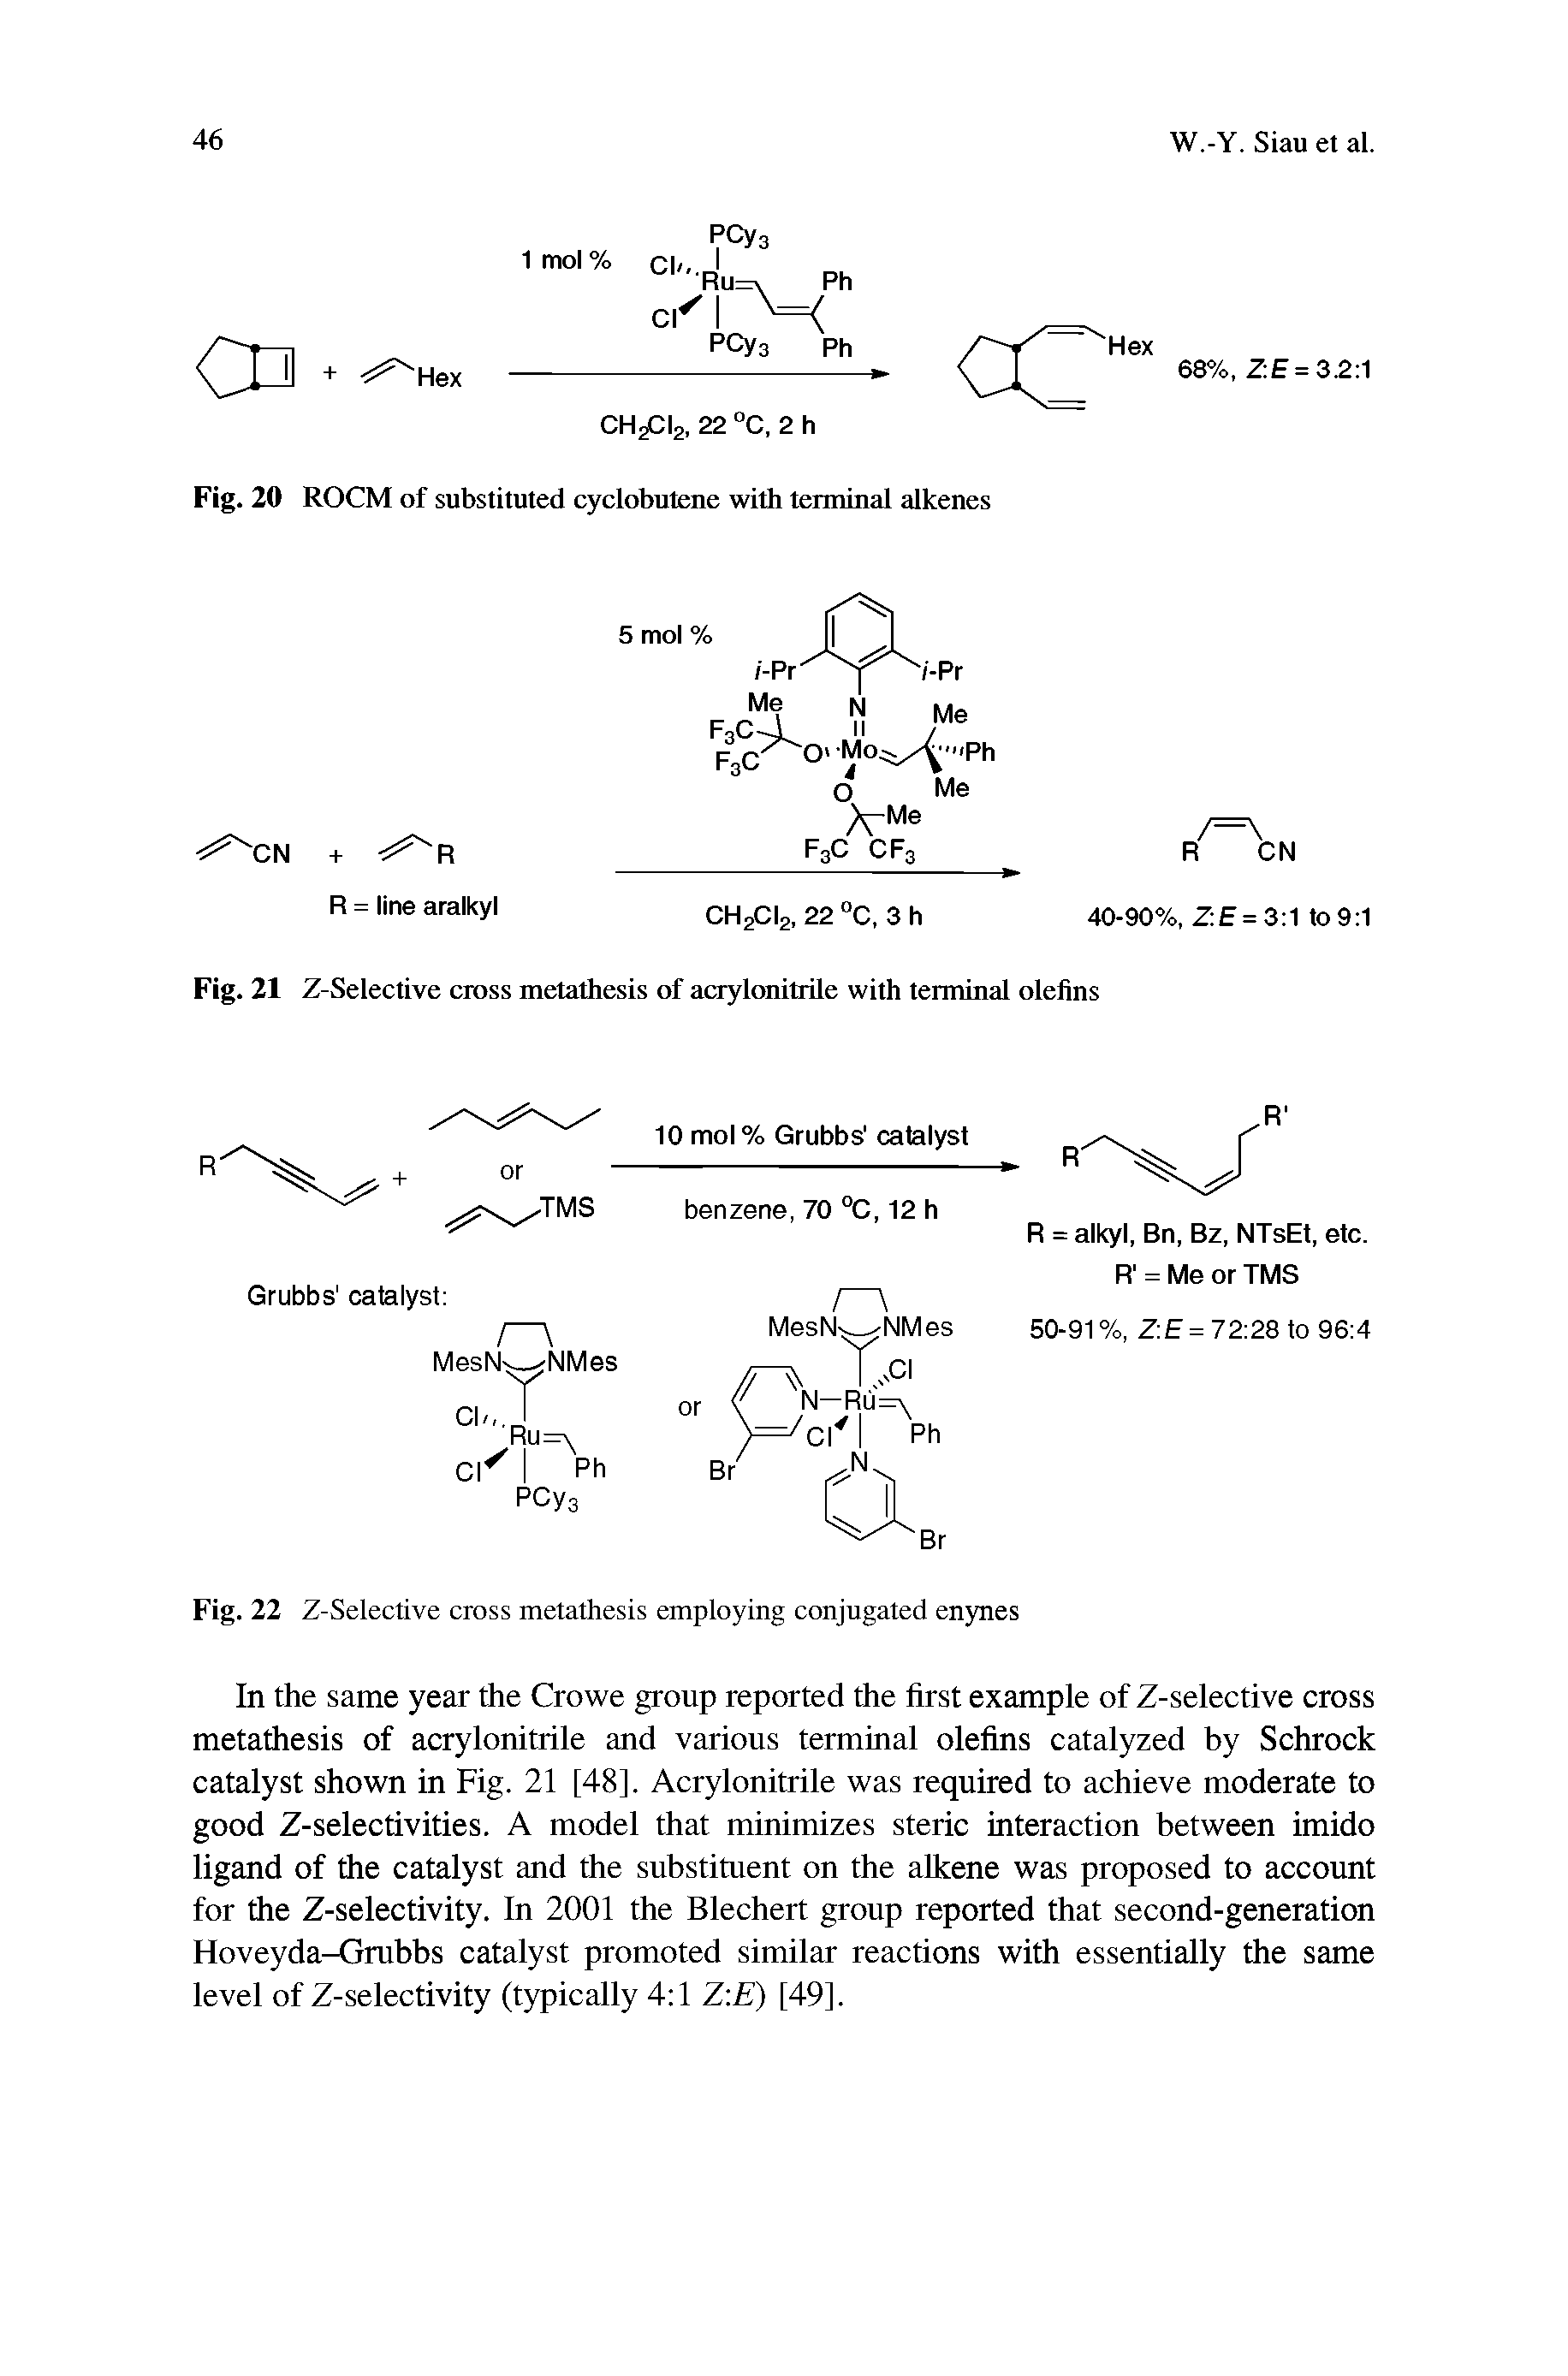 Fig. 21 Z-Selective cross metathesis of acrylonitrile with terminal olefins...